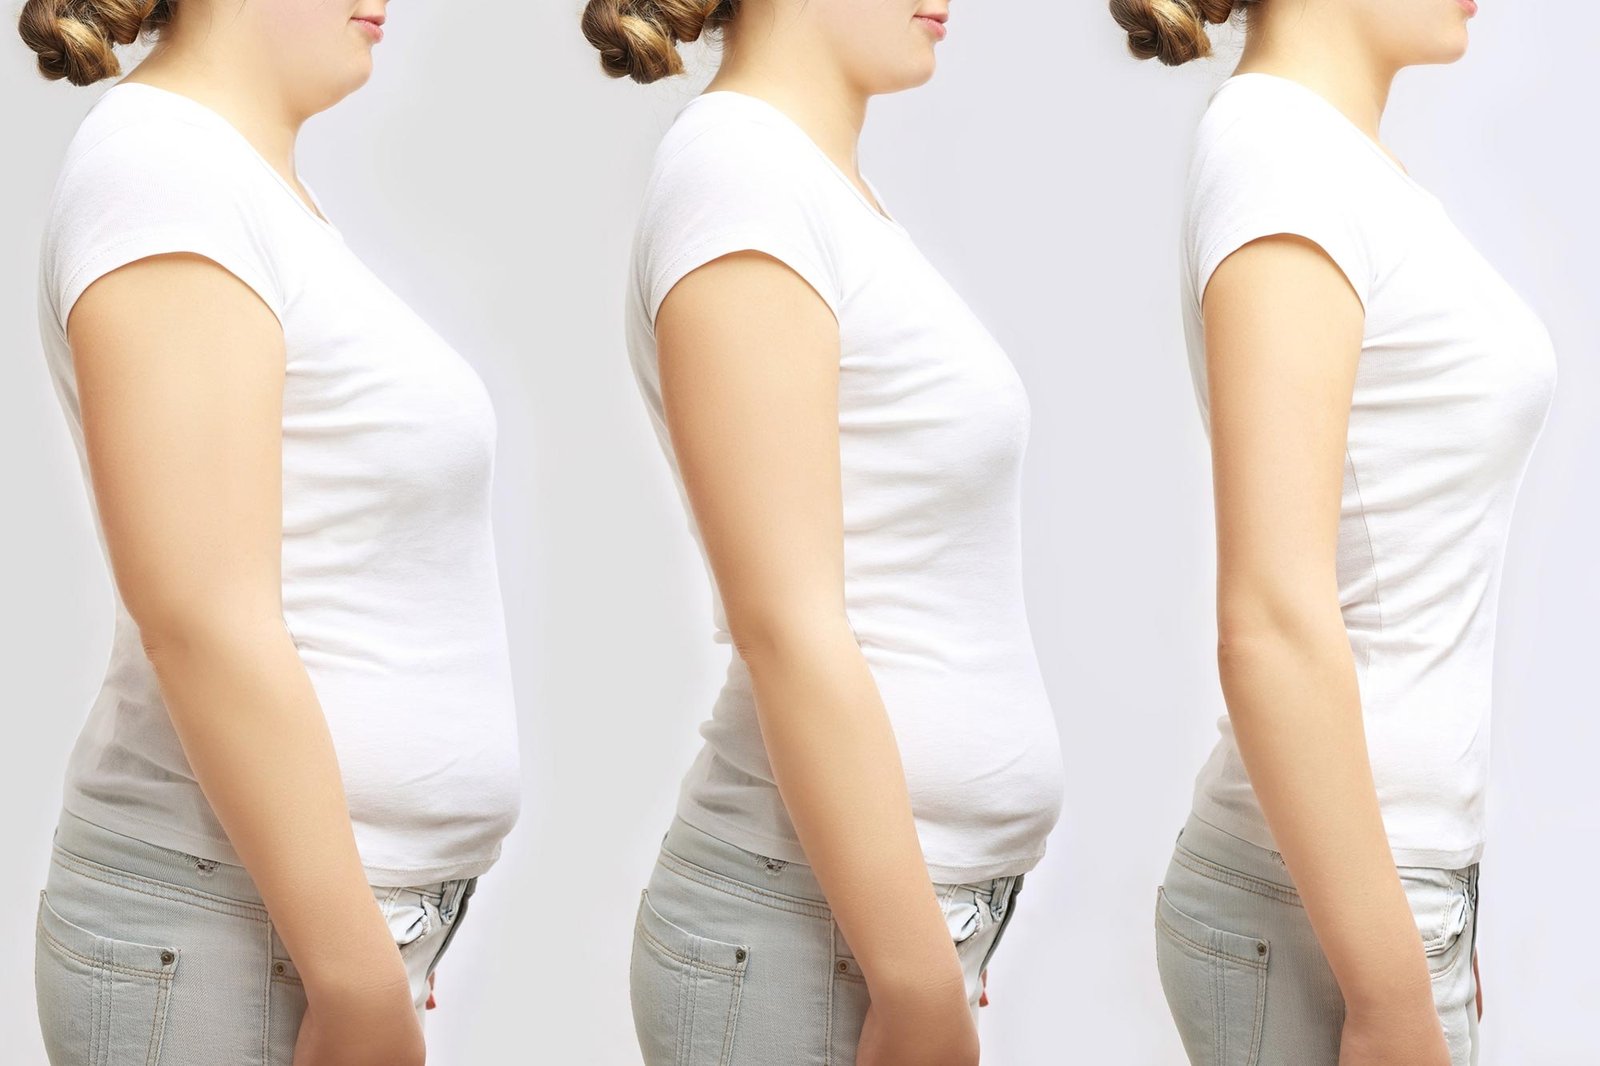 Groundbreaking New Weight Loss Drug Is More Effective Than Current Treatments